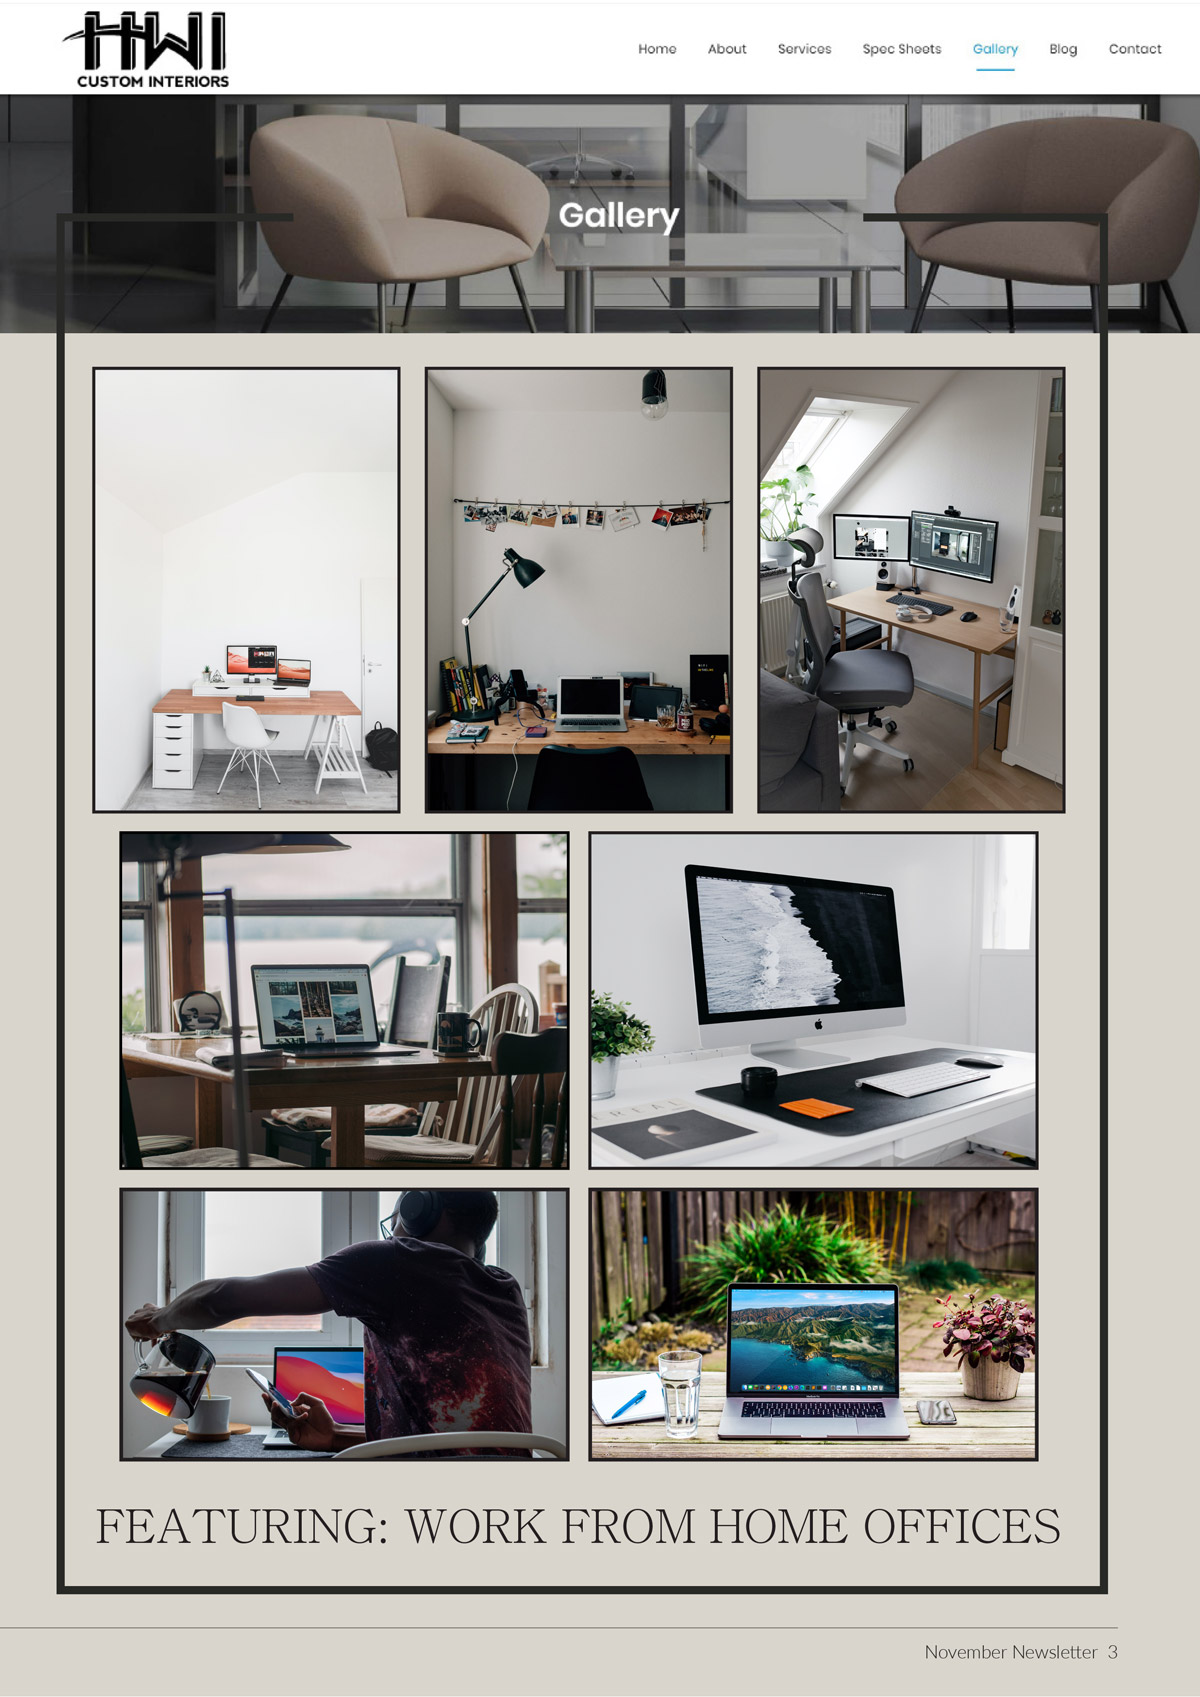 Gallery featuring work from home offices.